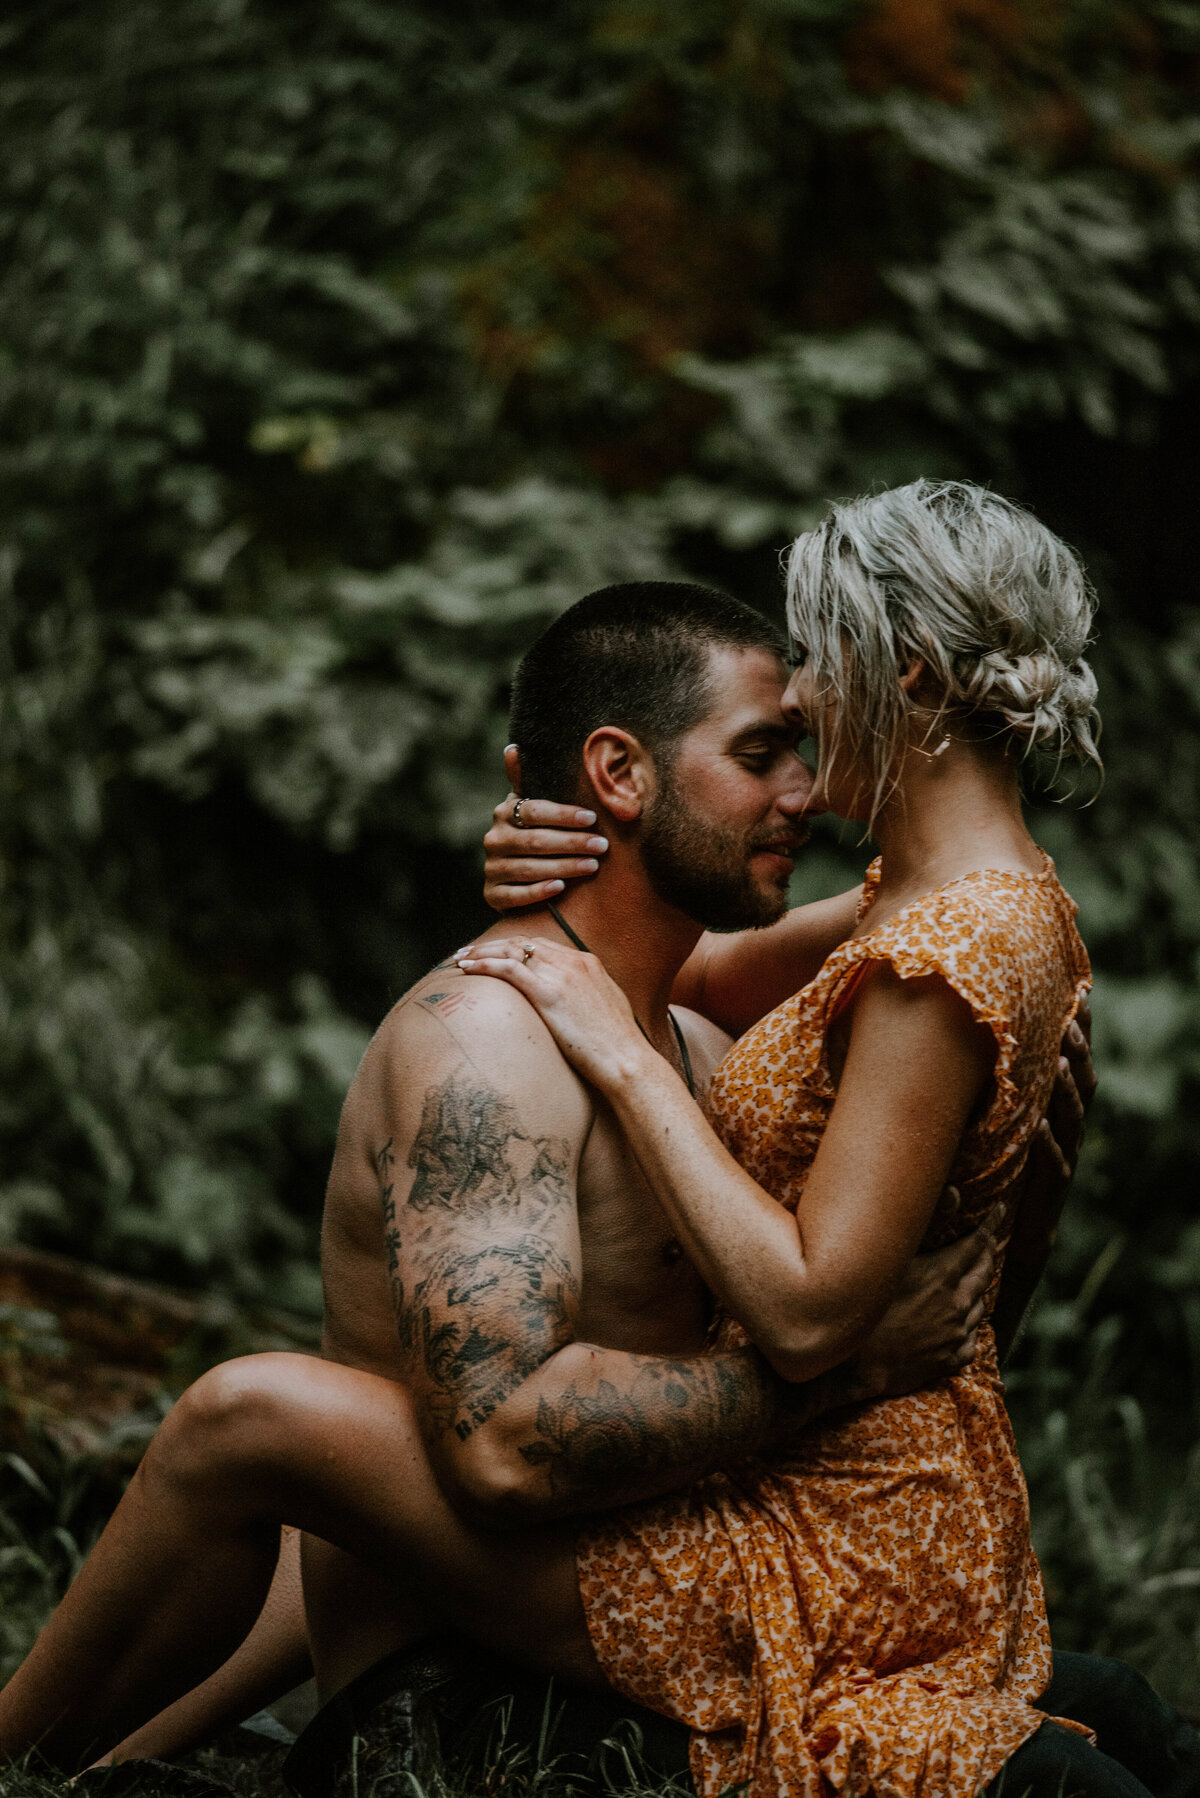 sahalie-falls-oregon-engagement-elopement-photographer-central-waterfall-bend-forest-old-growth-8137